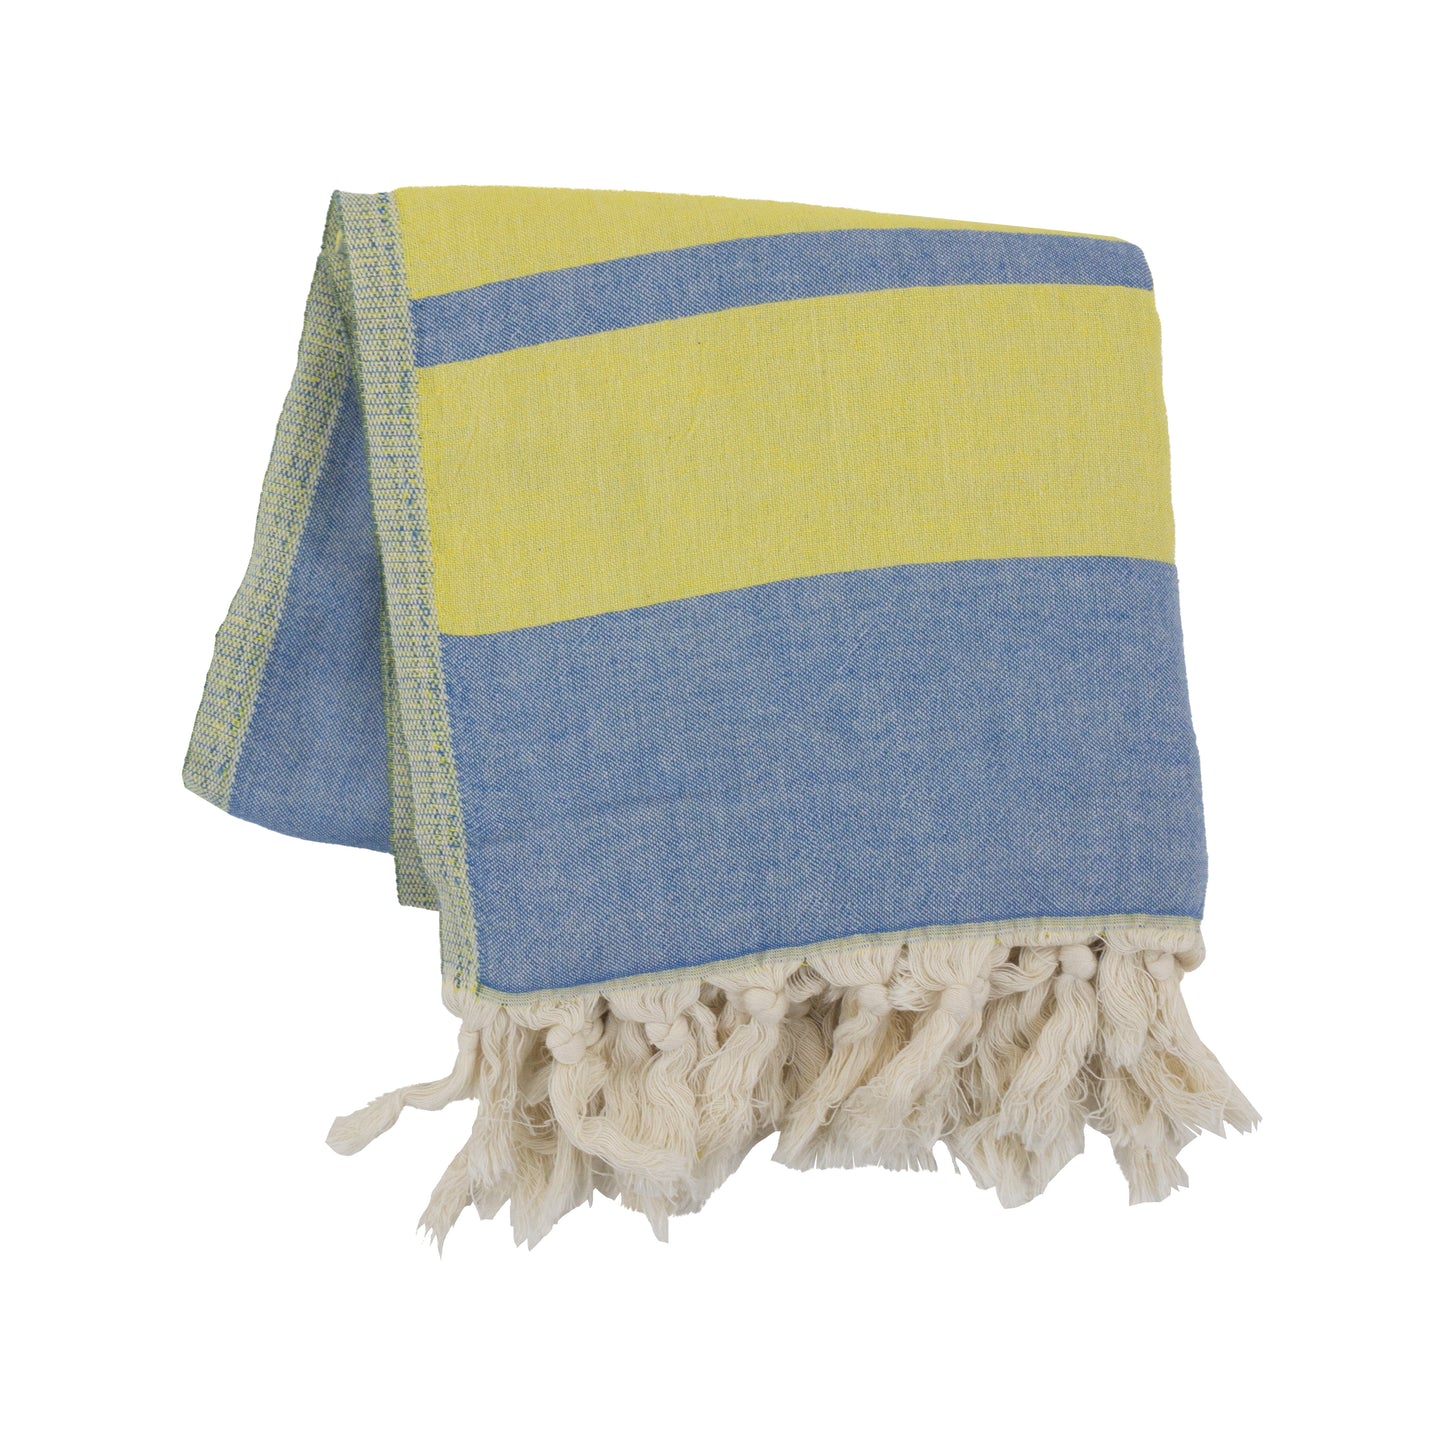 Limited Edition Golden Road Turkish Towel